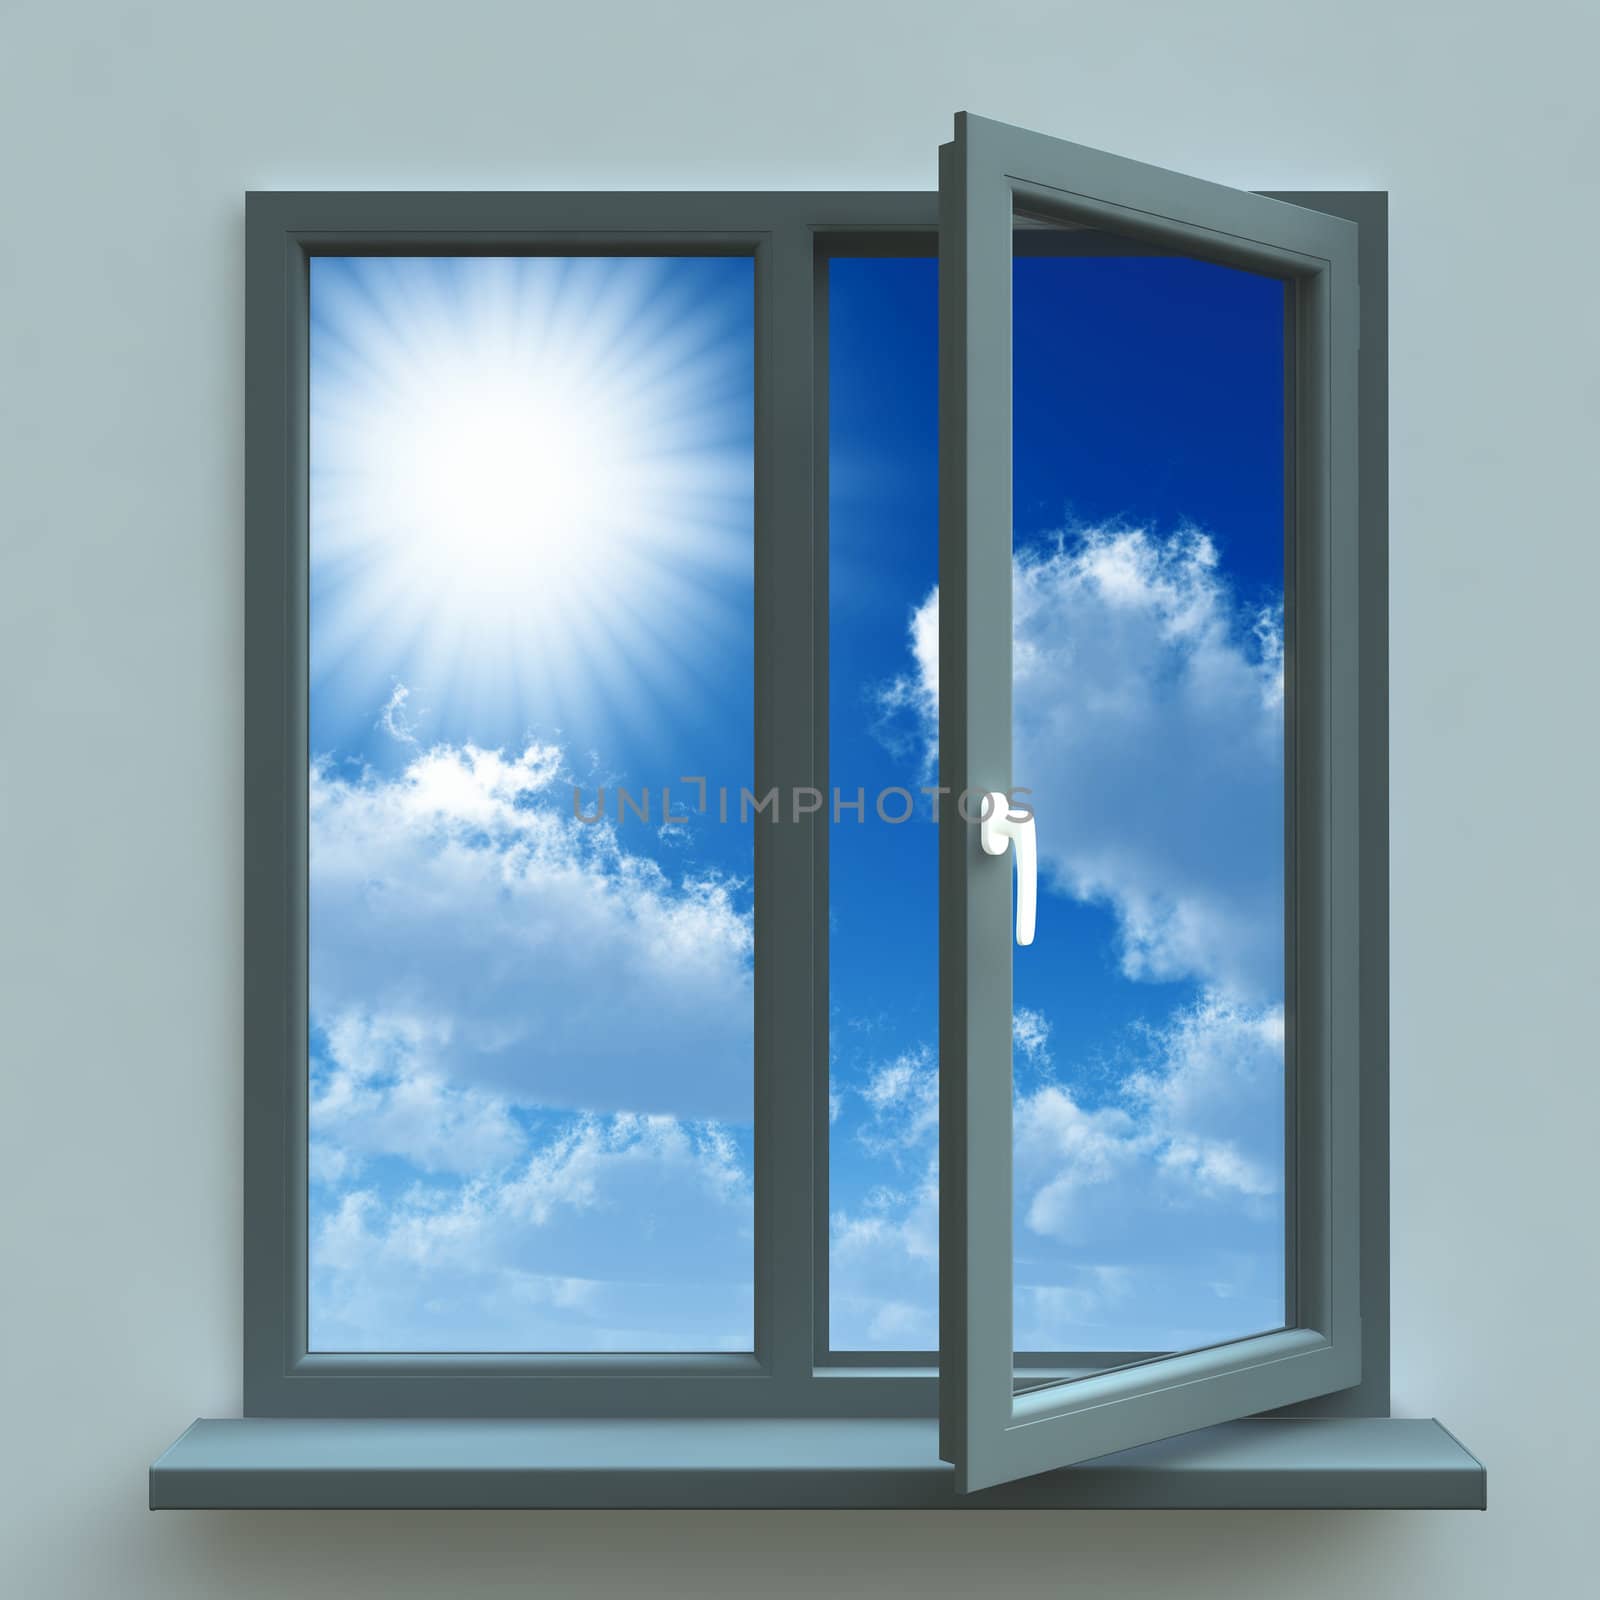 Open window against a blue wall and the cloudy sky and sun